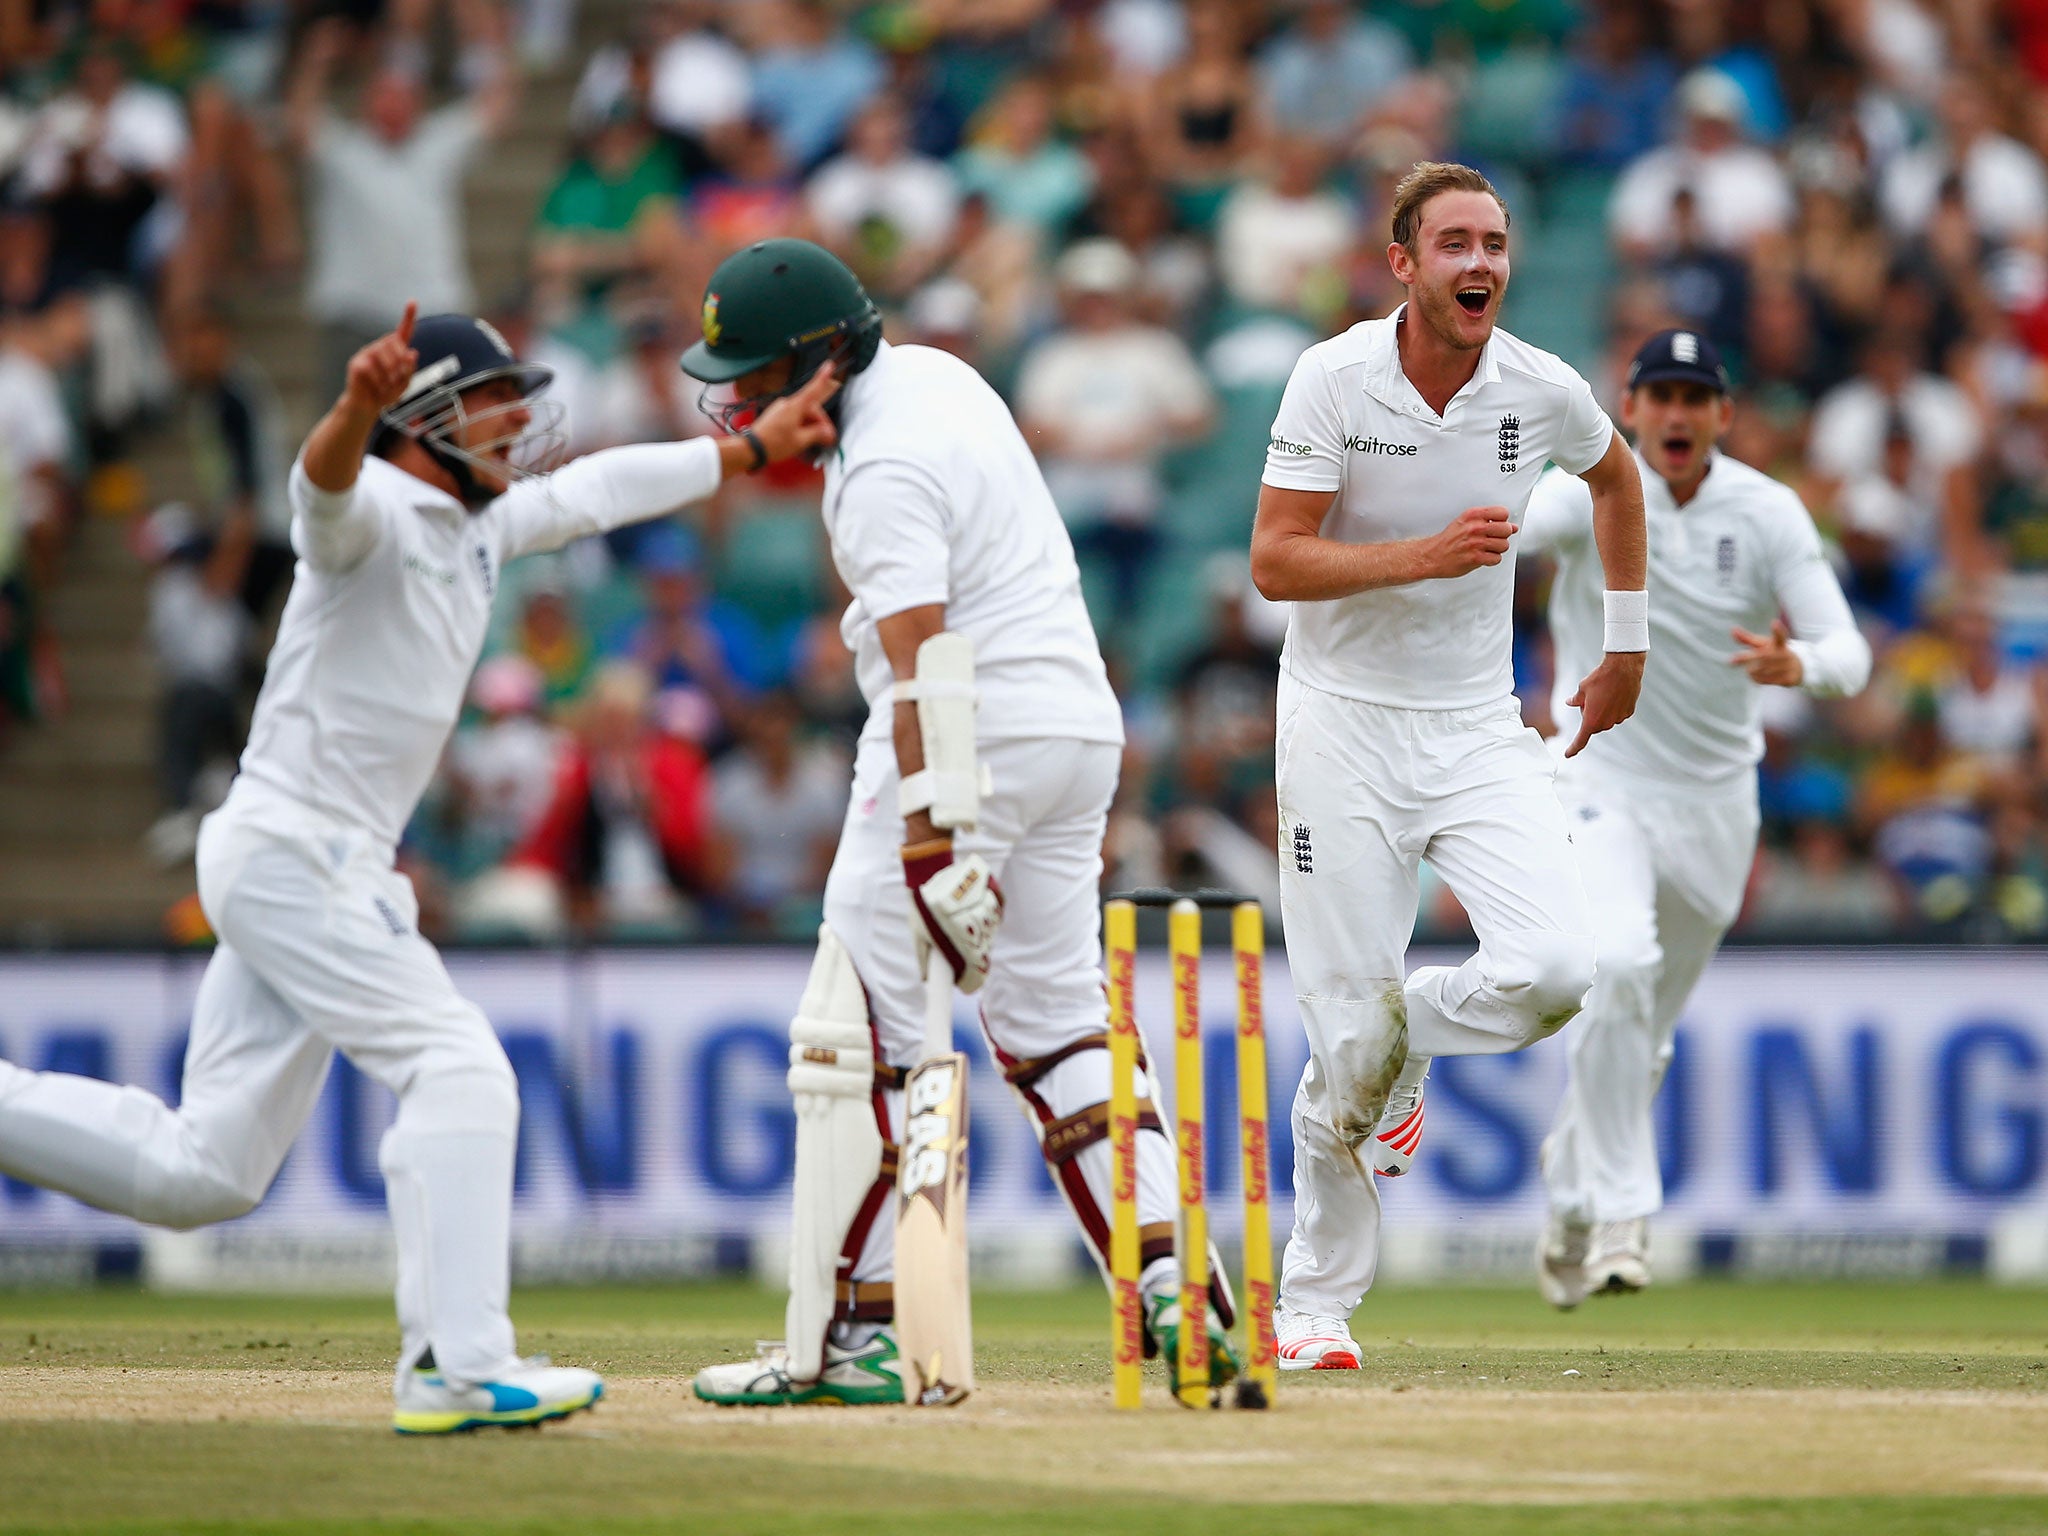 A joyous Stuart Broad of England celebrates taking the wicket of Hashim Amla thanks to a wonderful catch by James Taylor